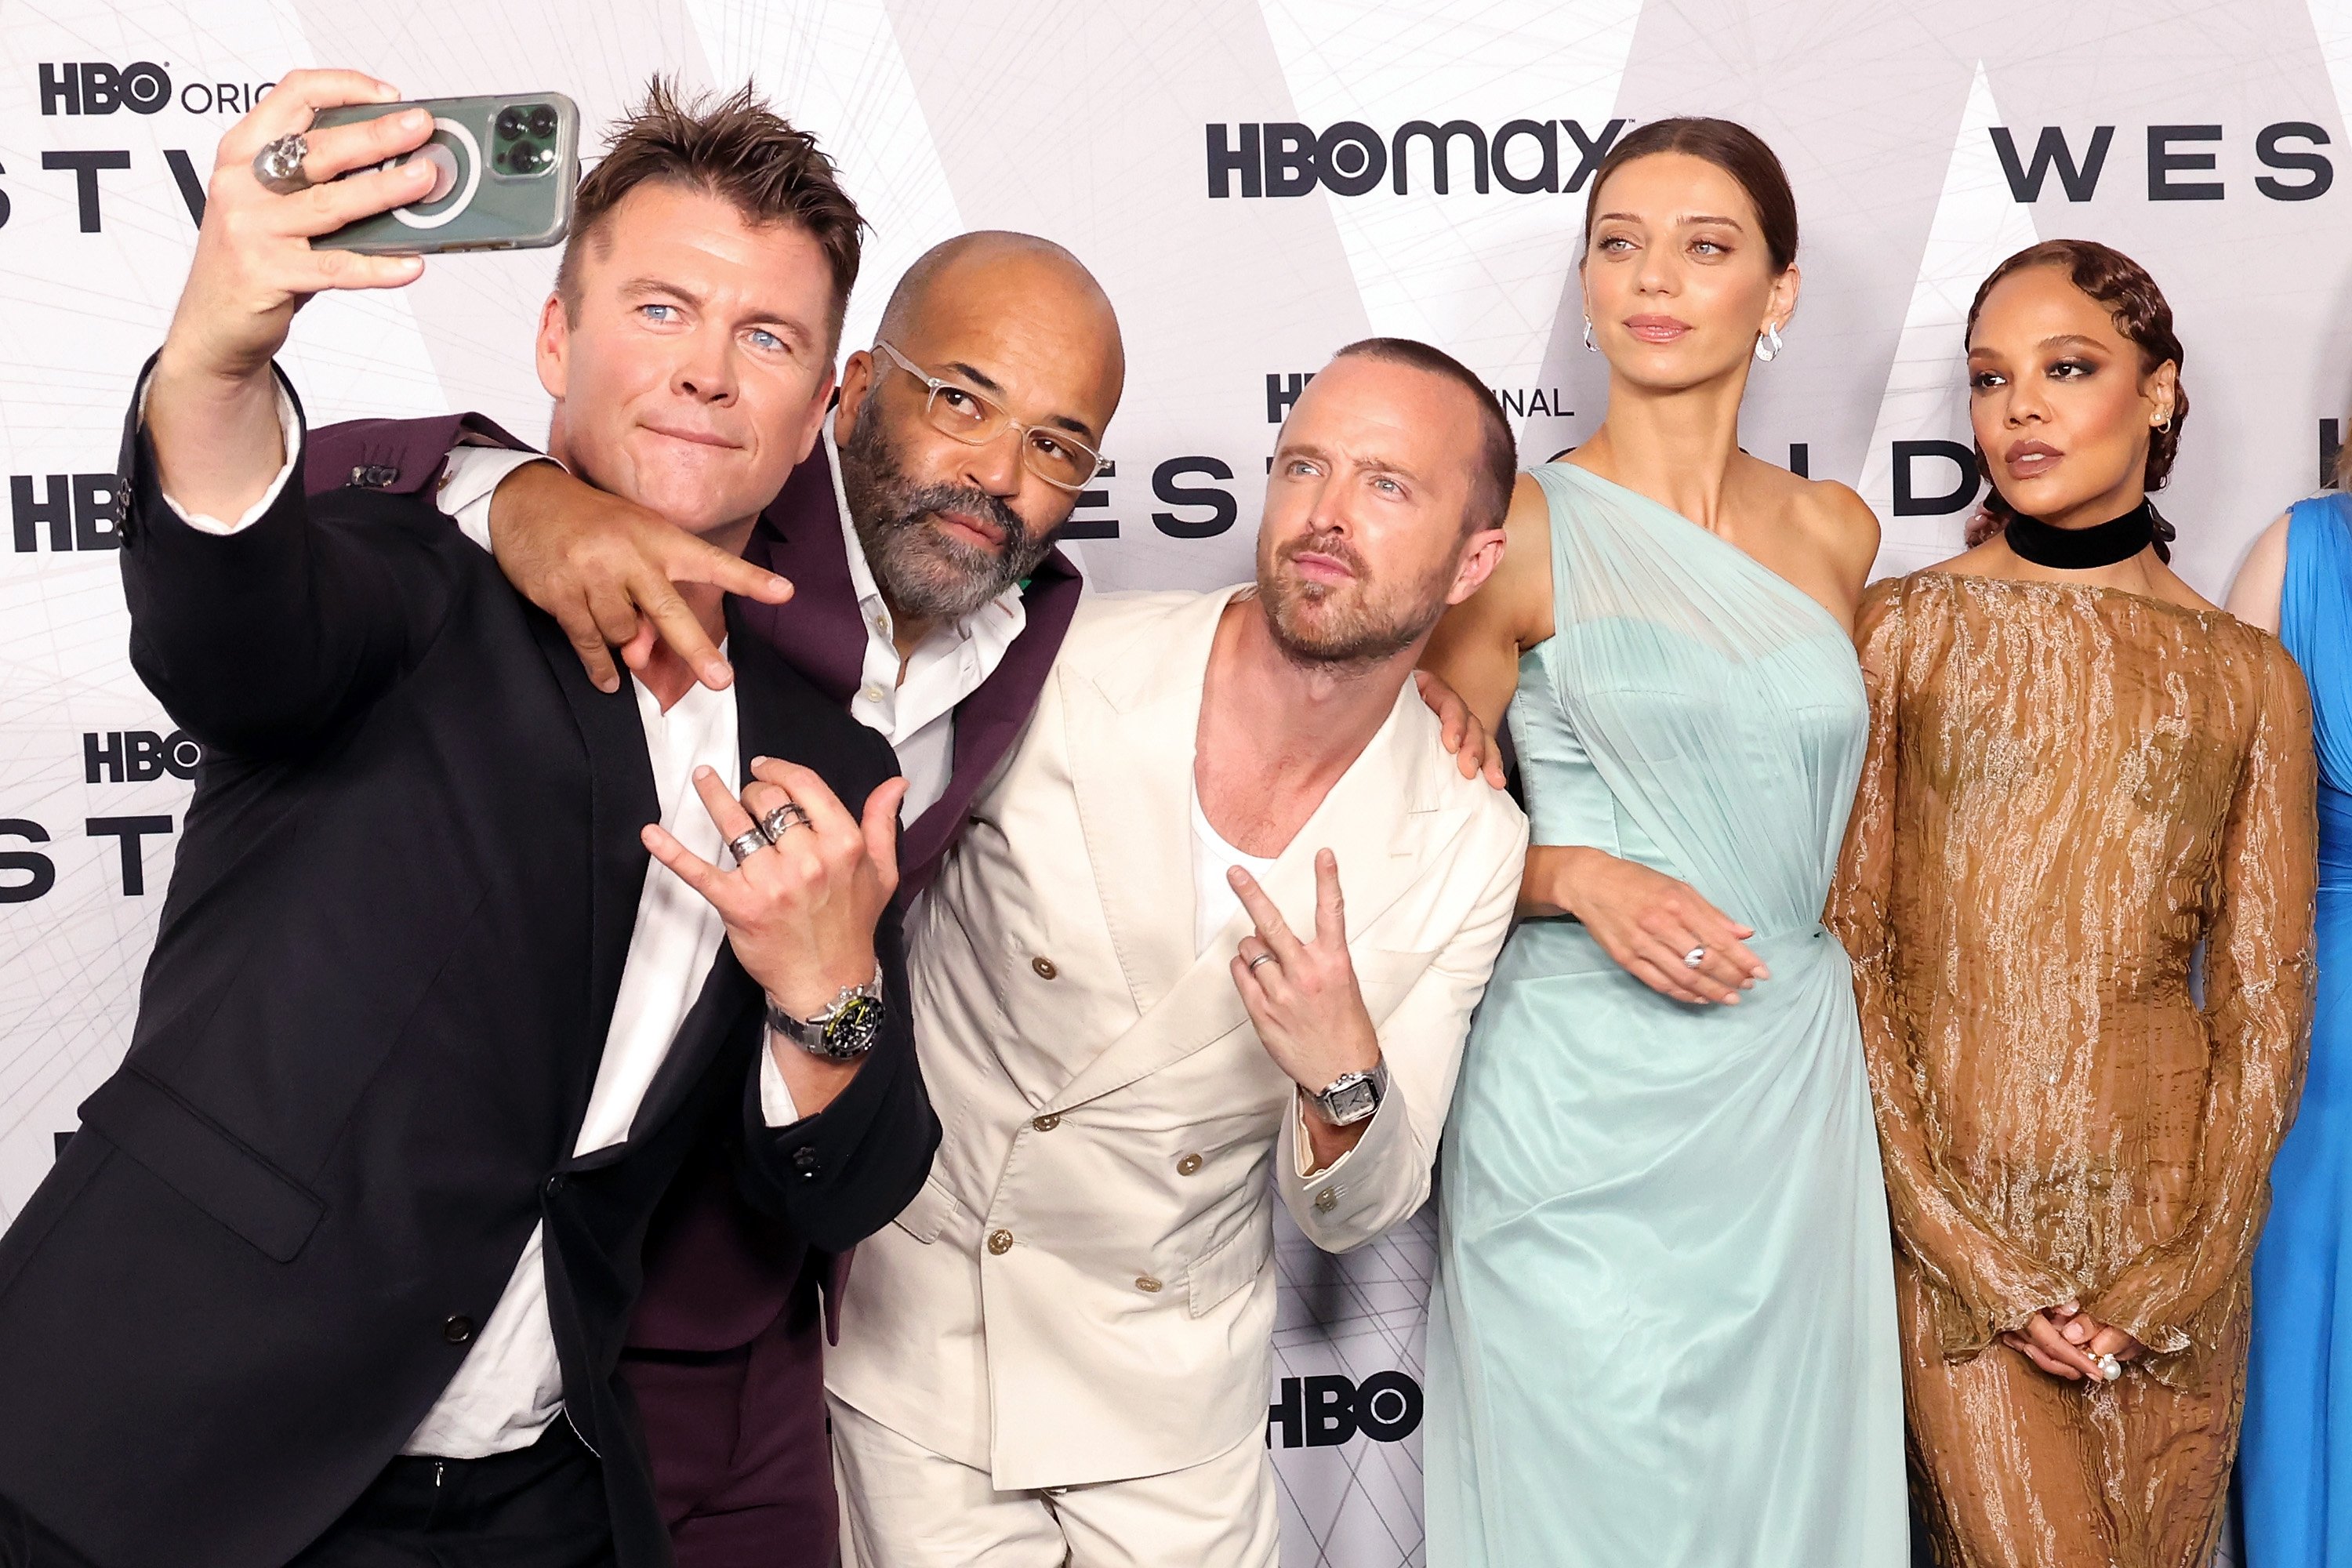 Luke Hemsworth, Jeffrey Wright, Aaron Paul, Angela Sarafyan, and Tessa Thompson attend the premiere of HBO's "Westworld" Season 4 on June 21, 2022 in New York City. | Source: Getty Images